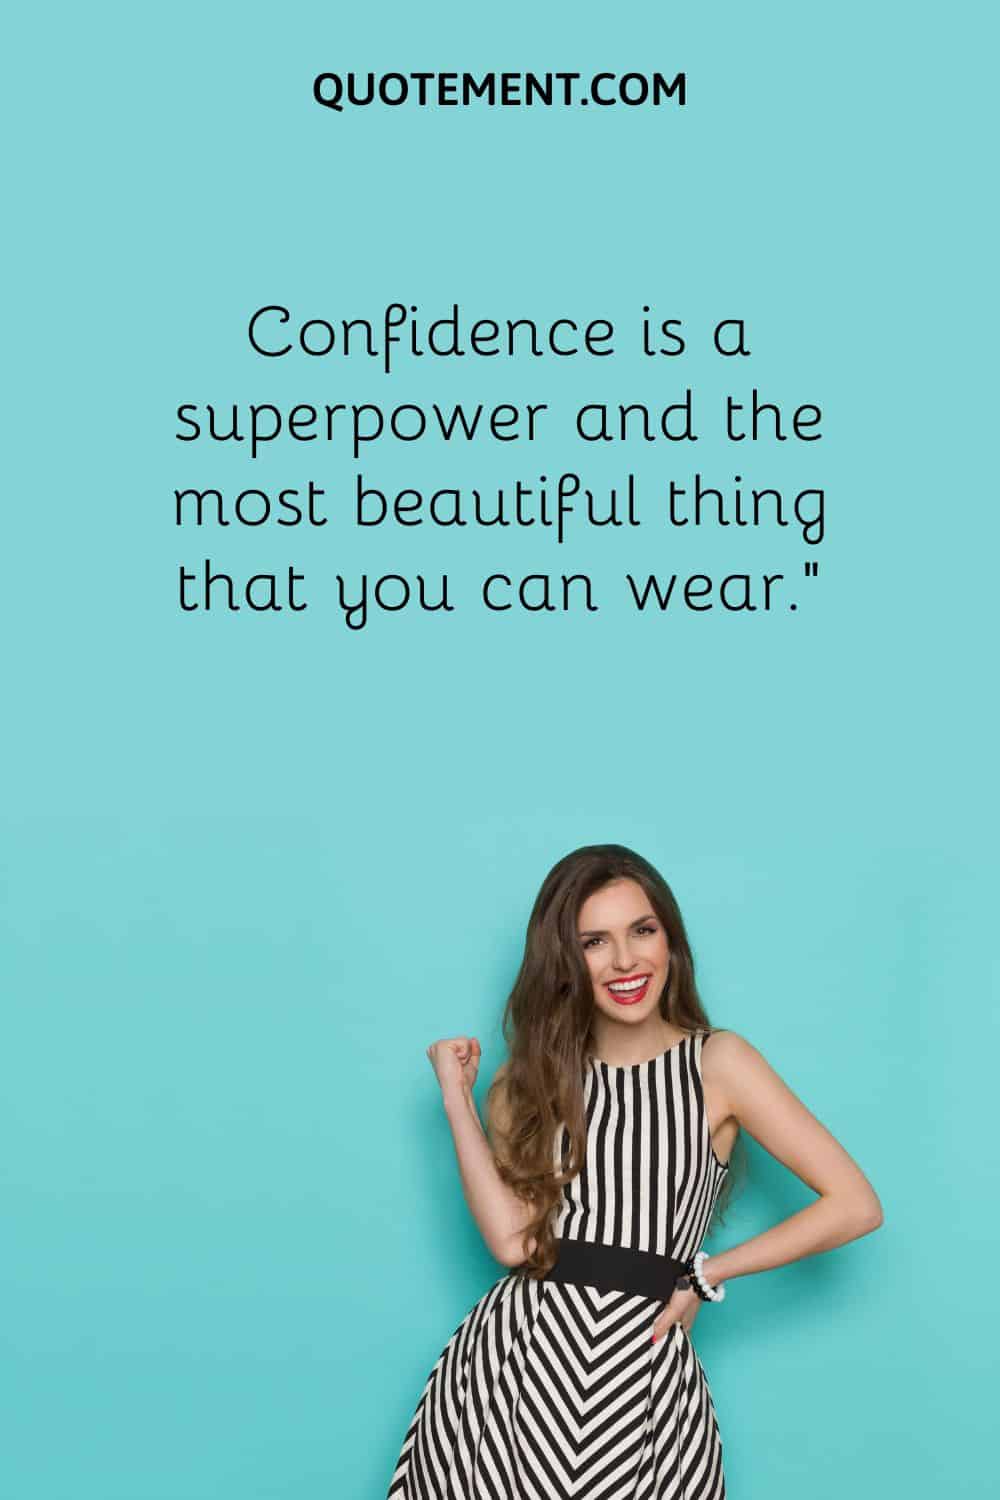 Confidence is a superpower and the most beautiful thing that you can wear.